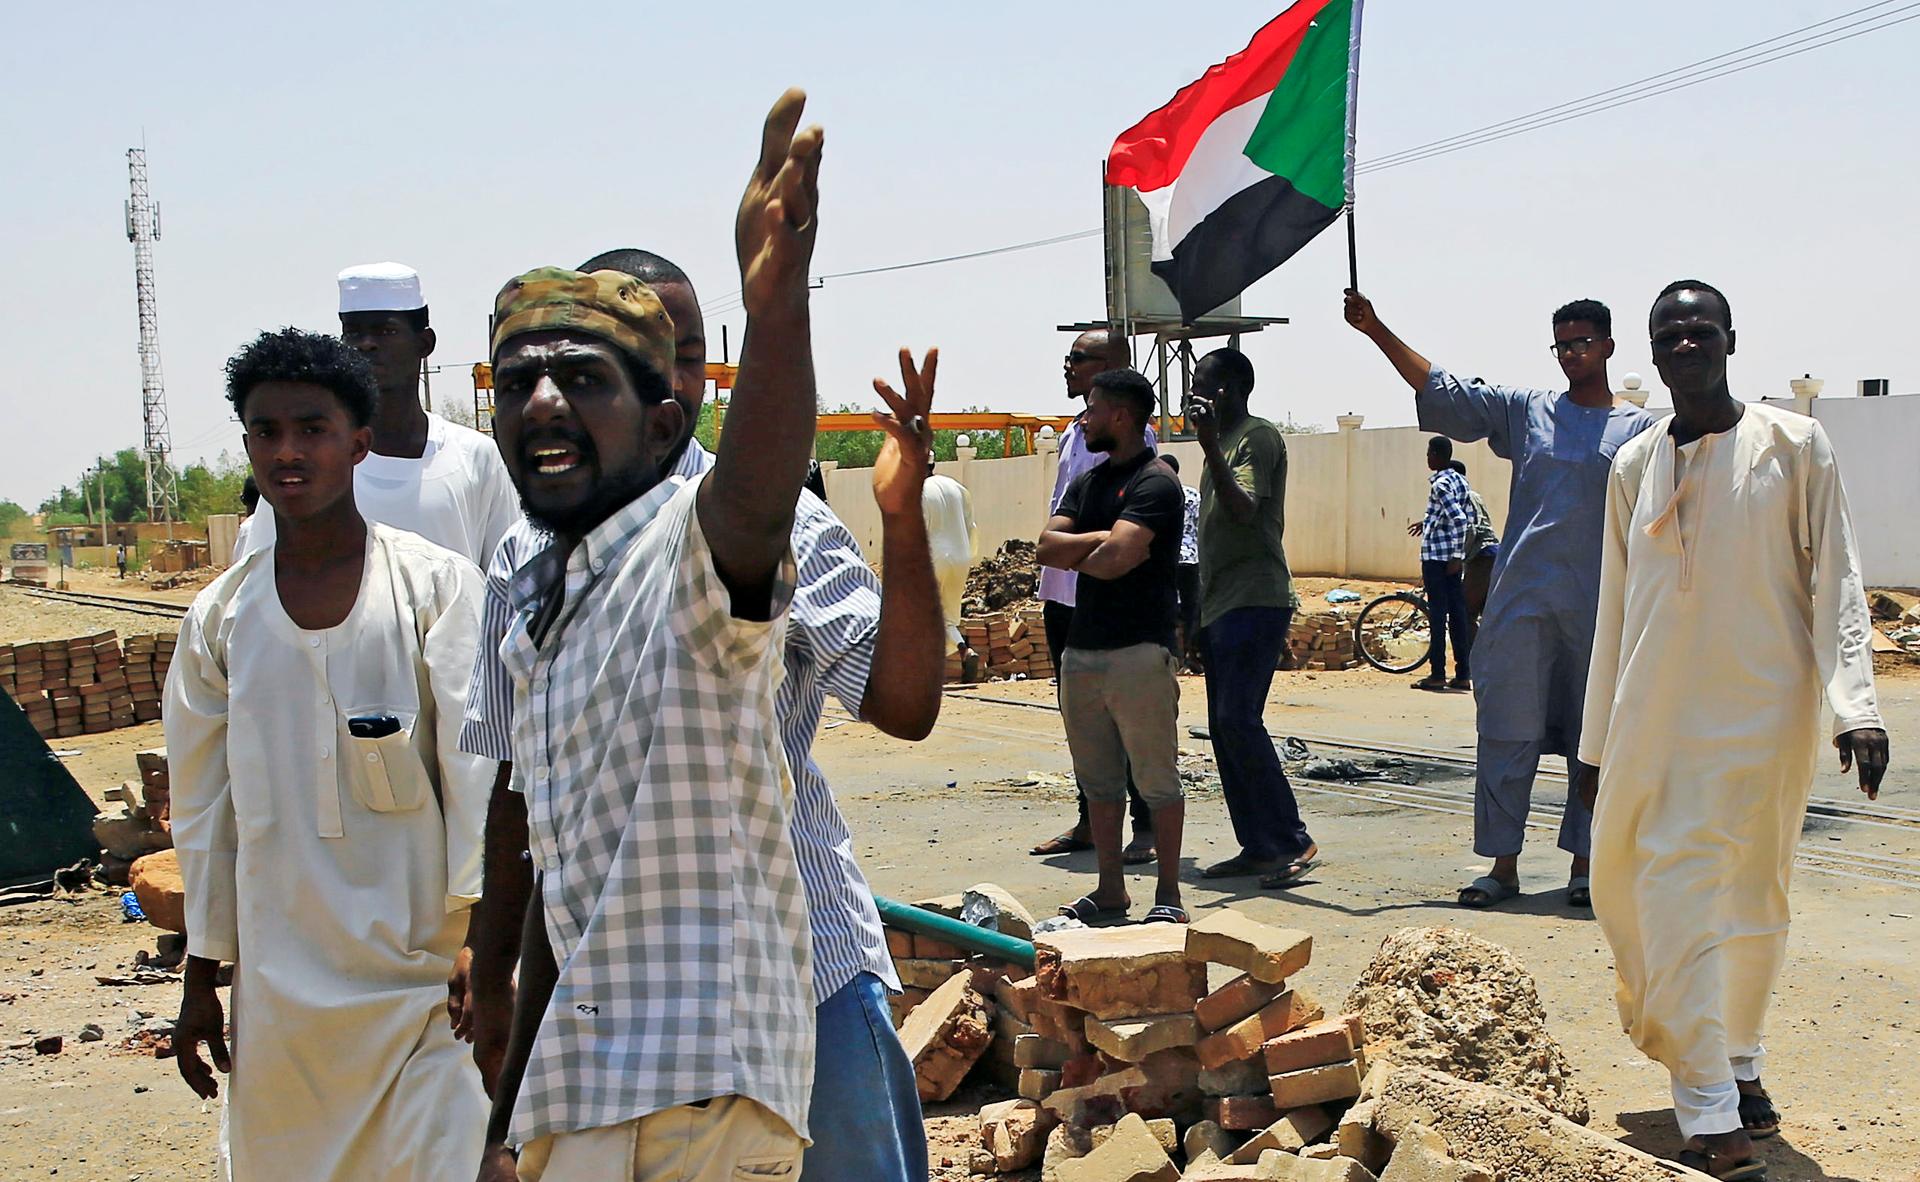 Men set up barricade and wave flag of Sudan